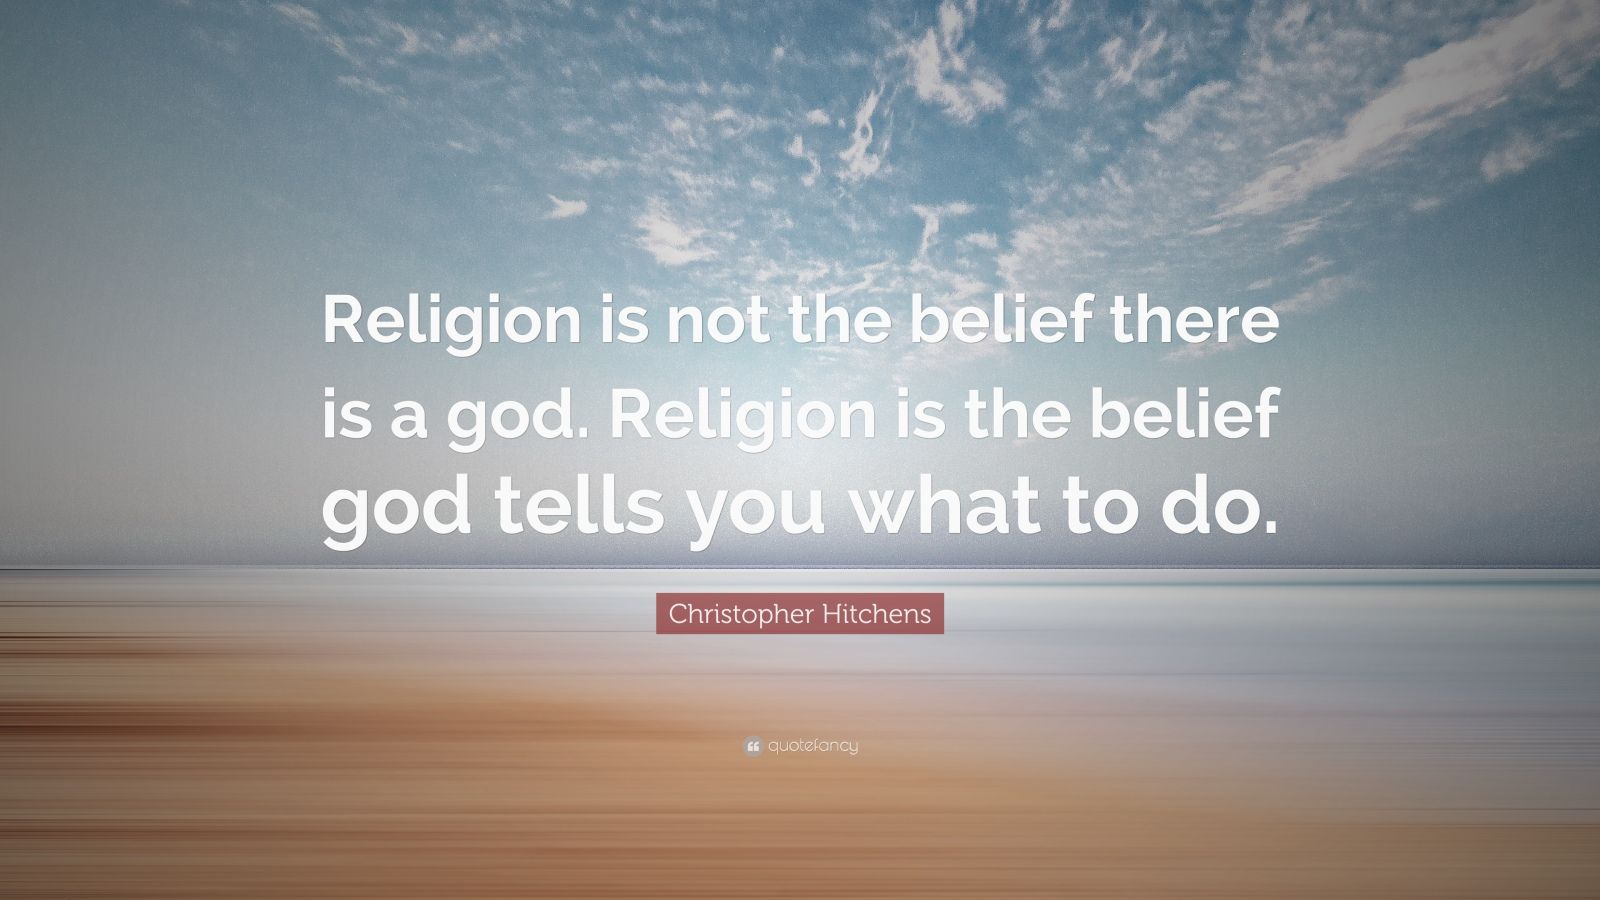 Christopher Hitchens Quote: “Religion is not the belief there is a god ...